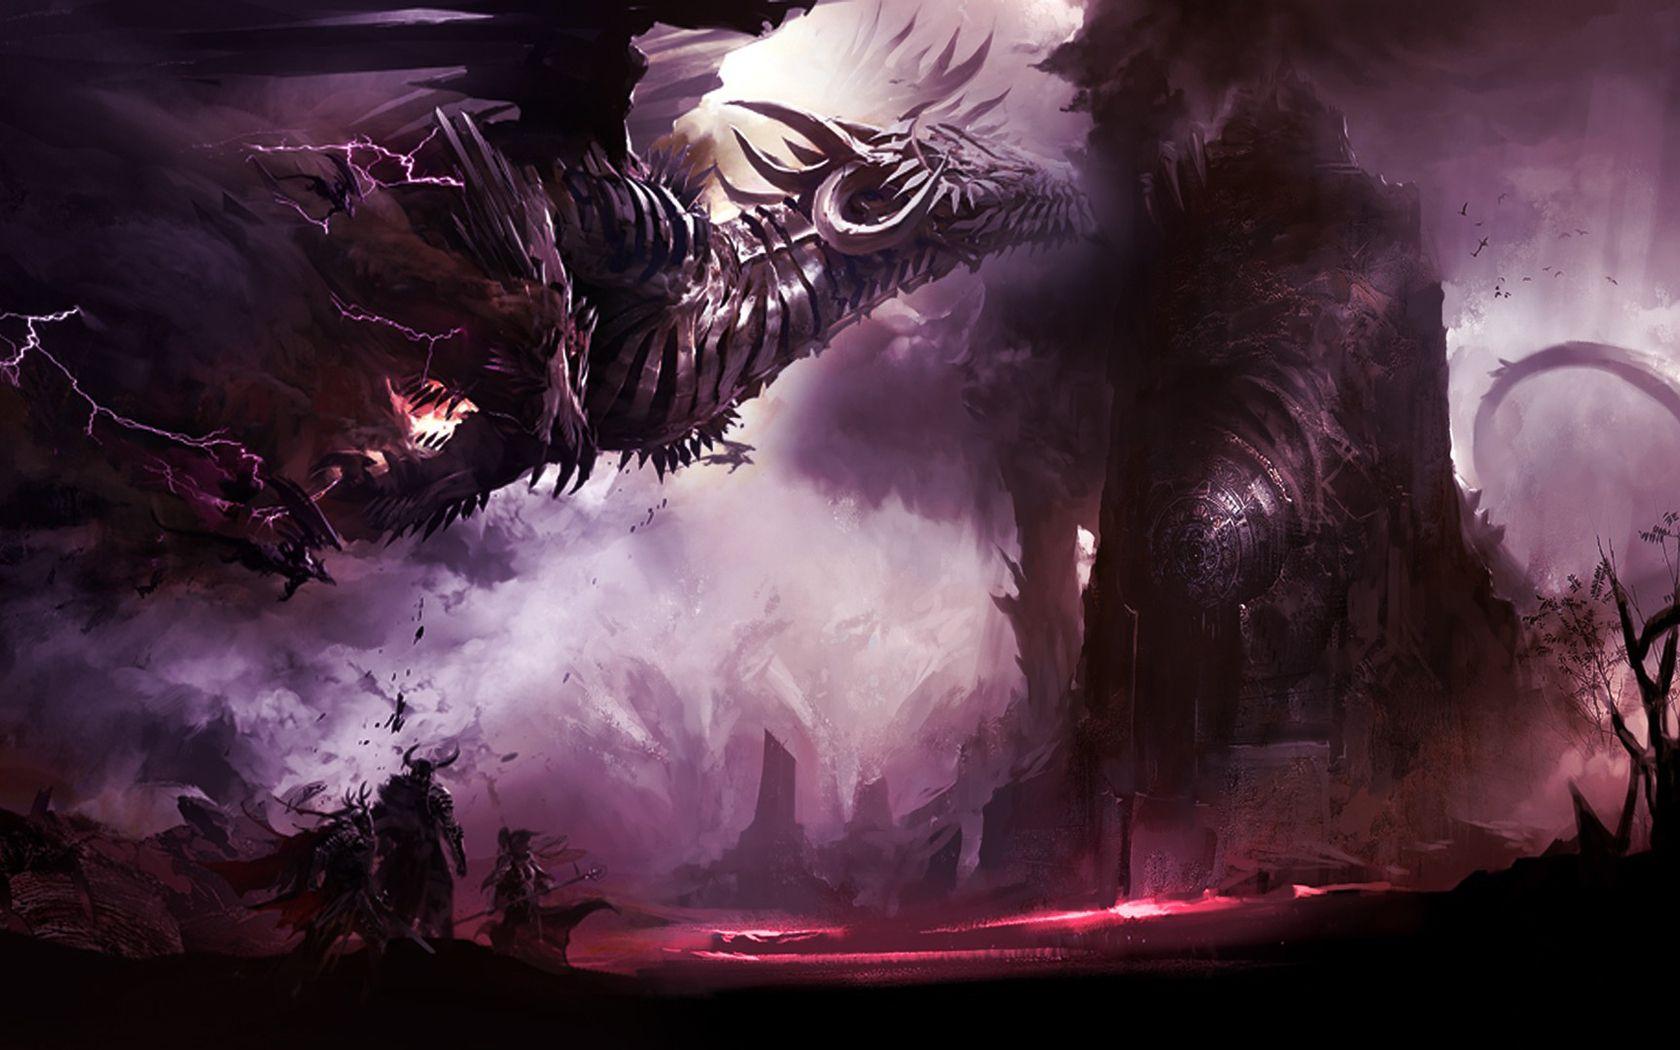 Download Witness The Epic Power Of This Dragon Wallpaper | Wallpapers.com